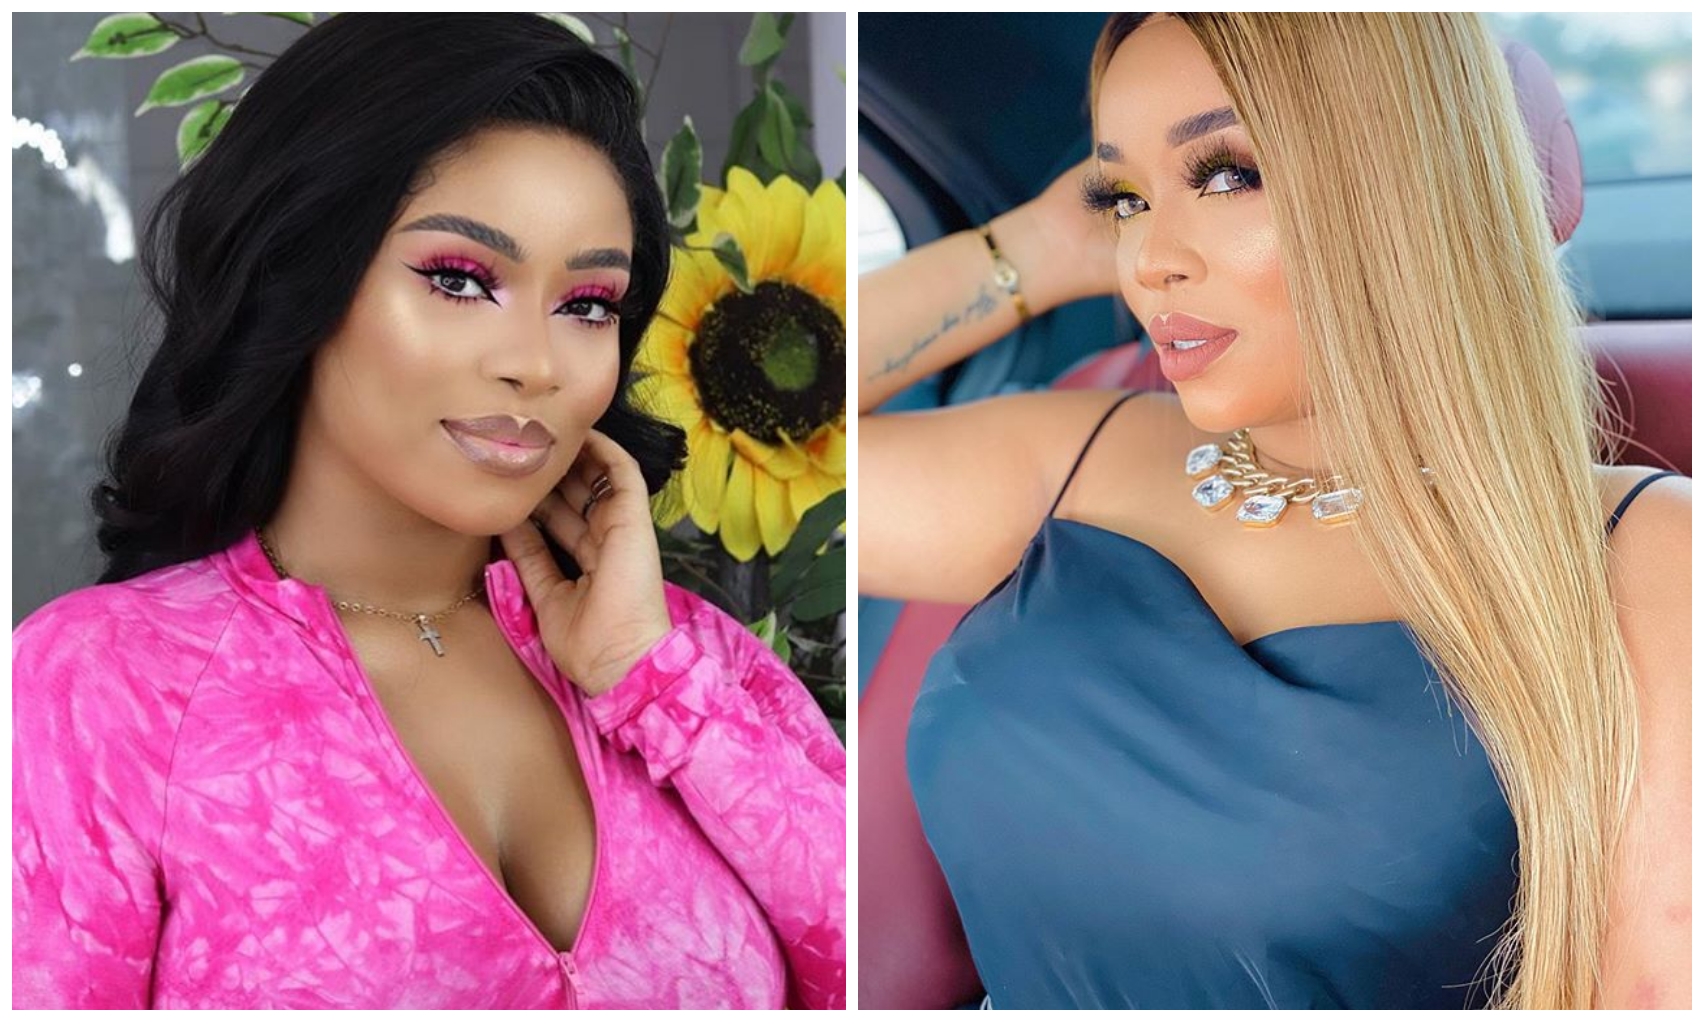 BBNaija stars are idolised for going naked on TV but celebrities are called prostitutes - Actress Onyii Alex laments